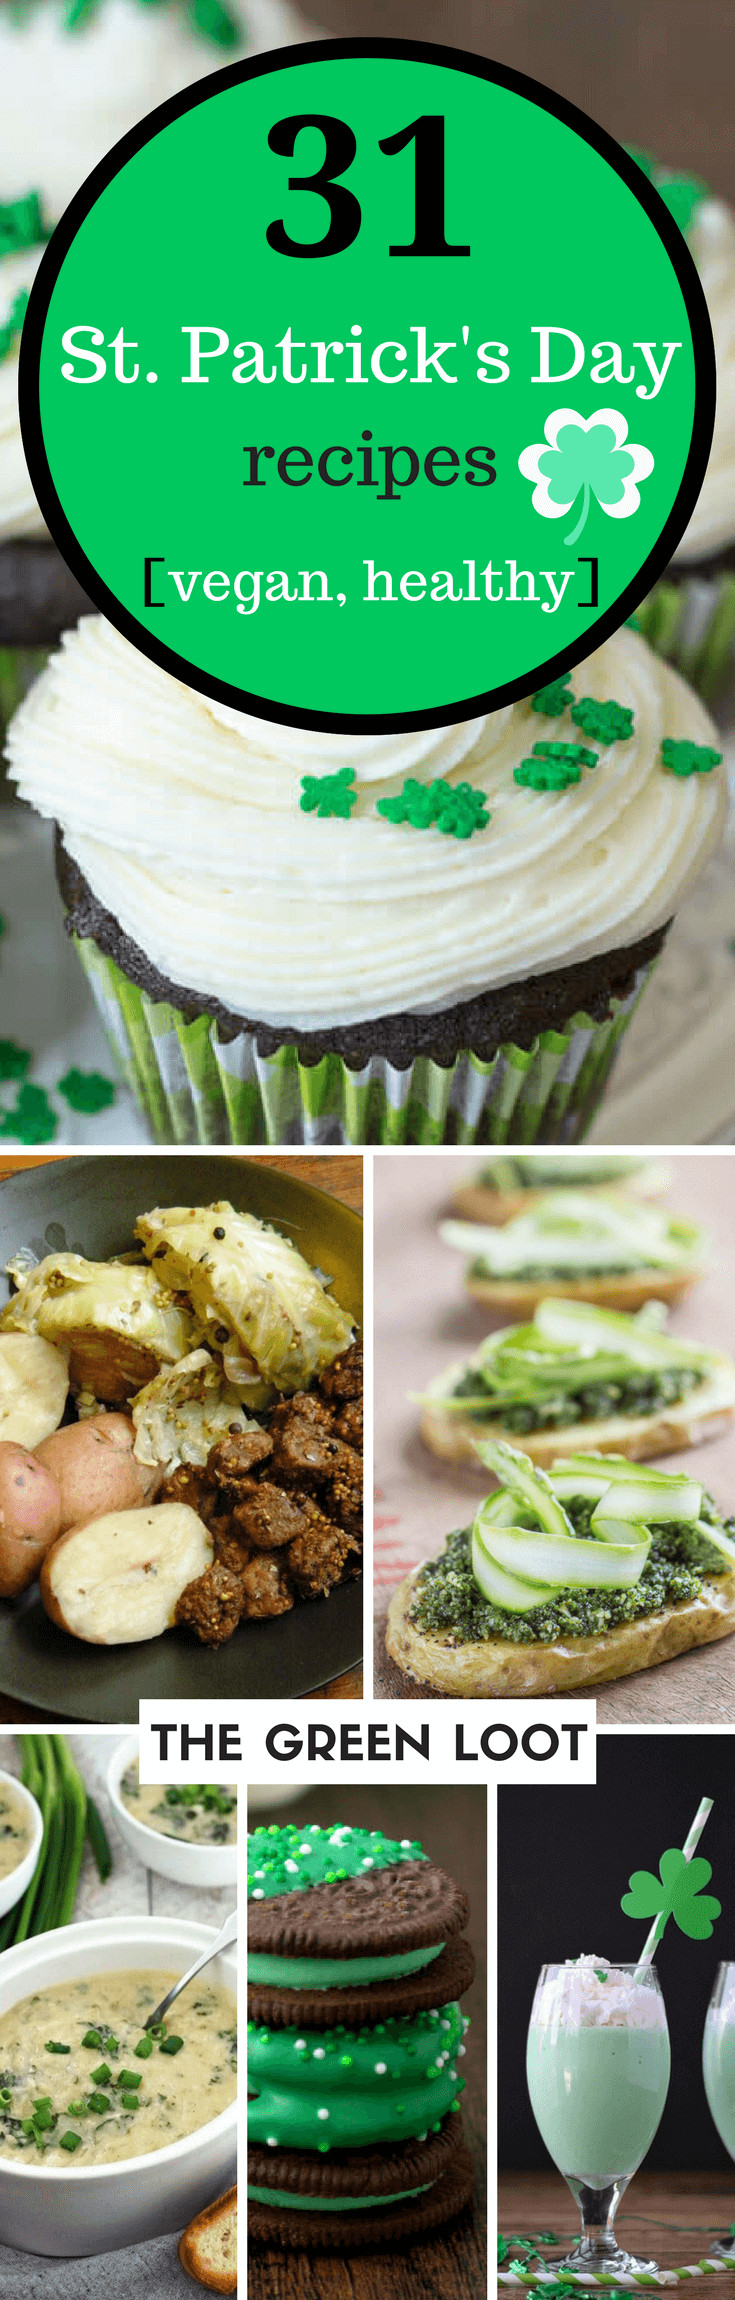 St Patrick Day Appetizers And Desserts
 31 Vegan St Patrick s Day Recipes Healthy Dairy free